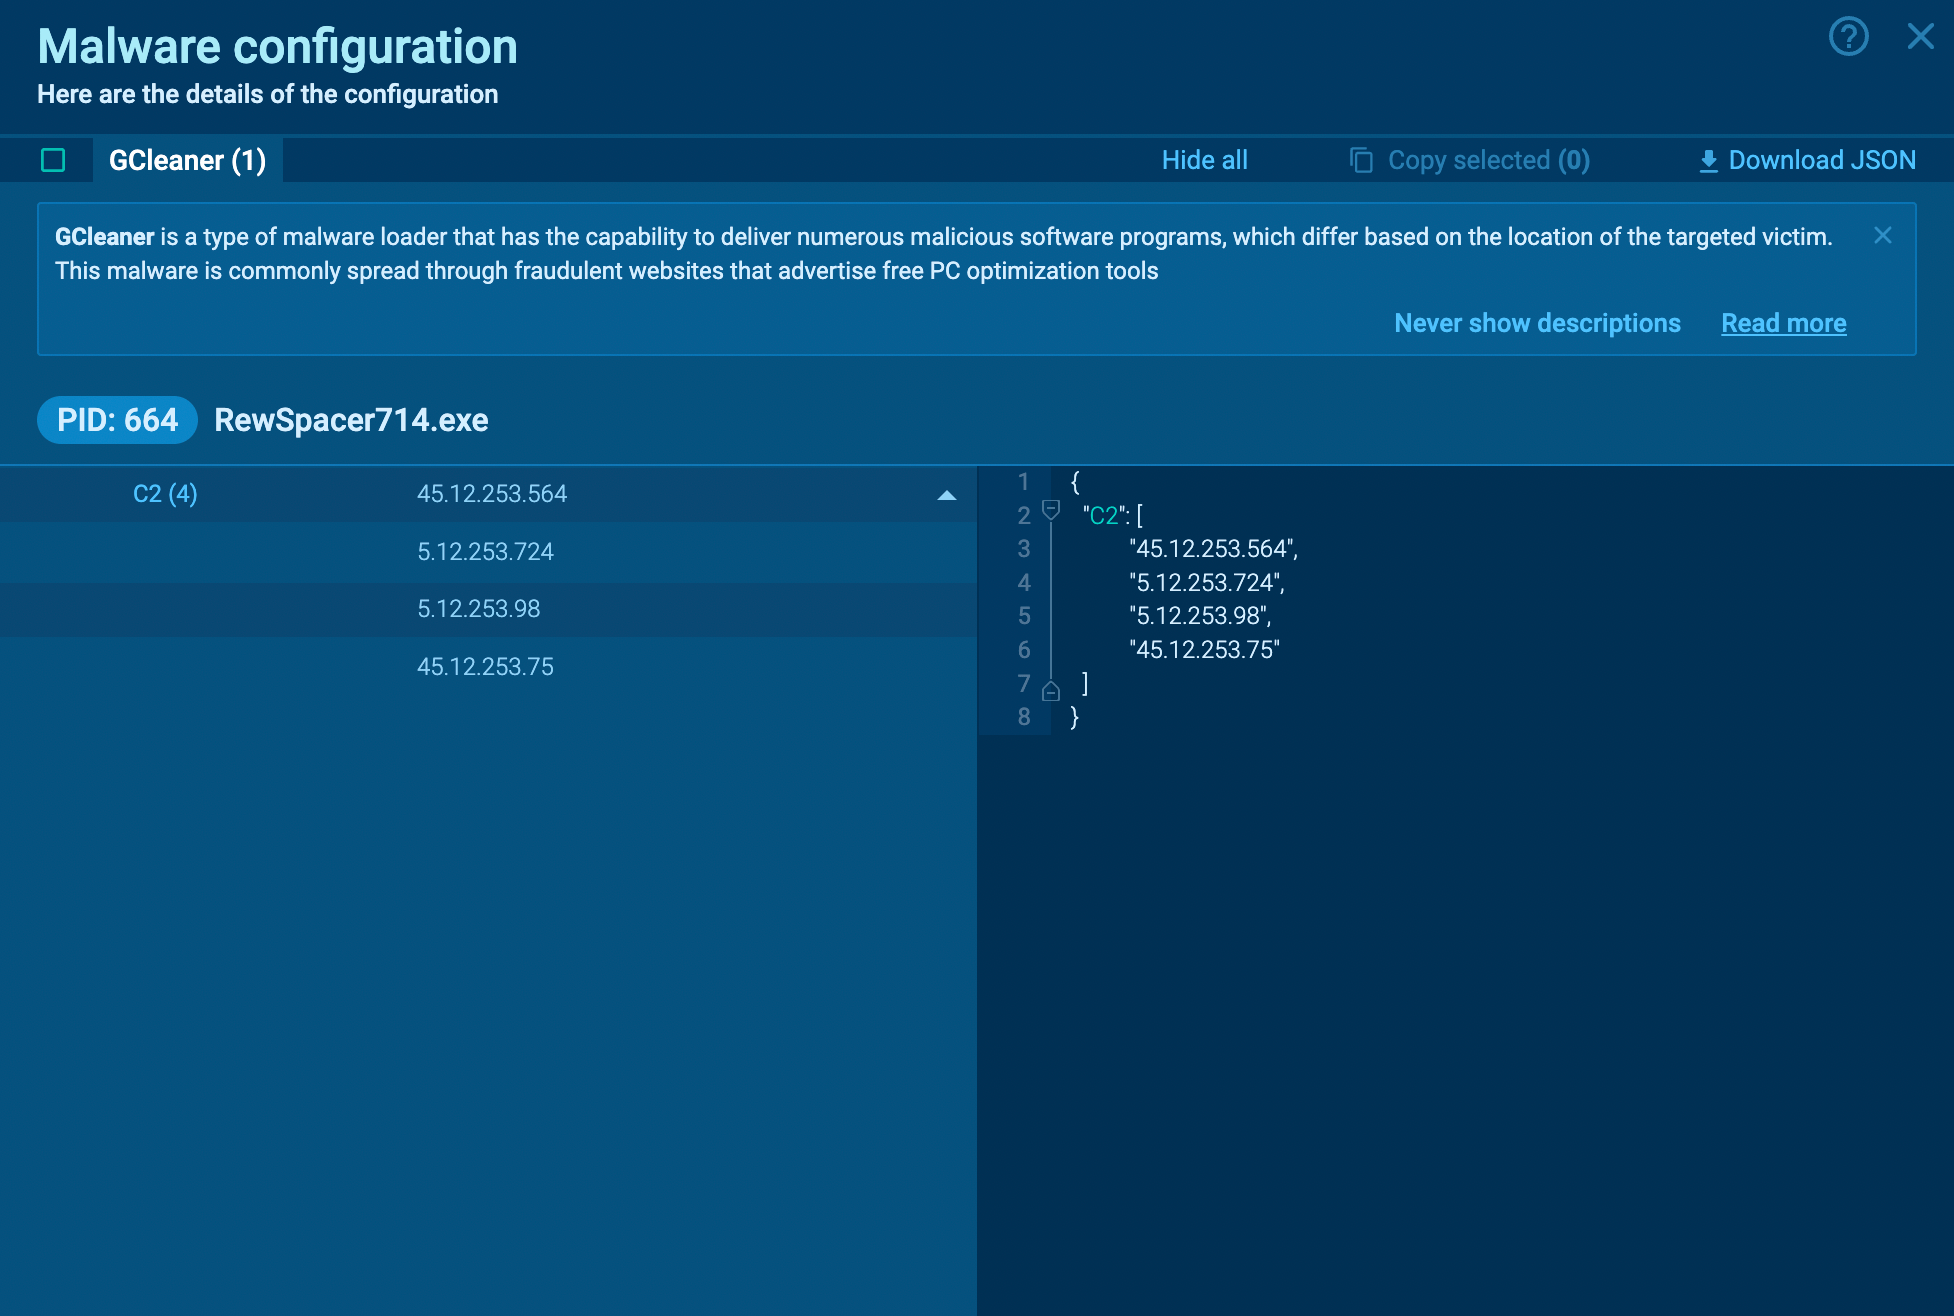 Gcleaner's configuration extracted by ANY.RUN